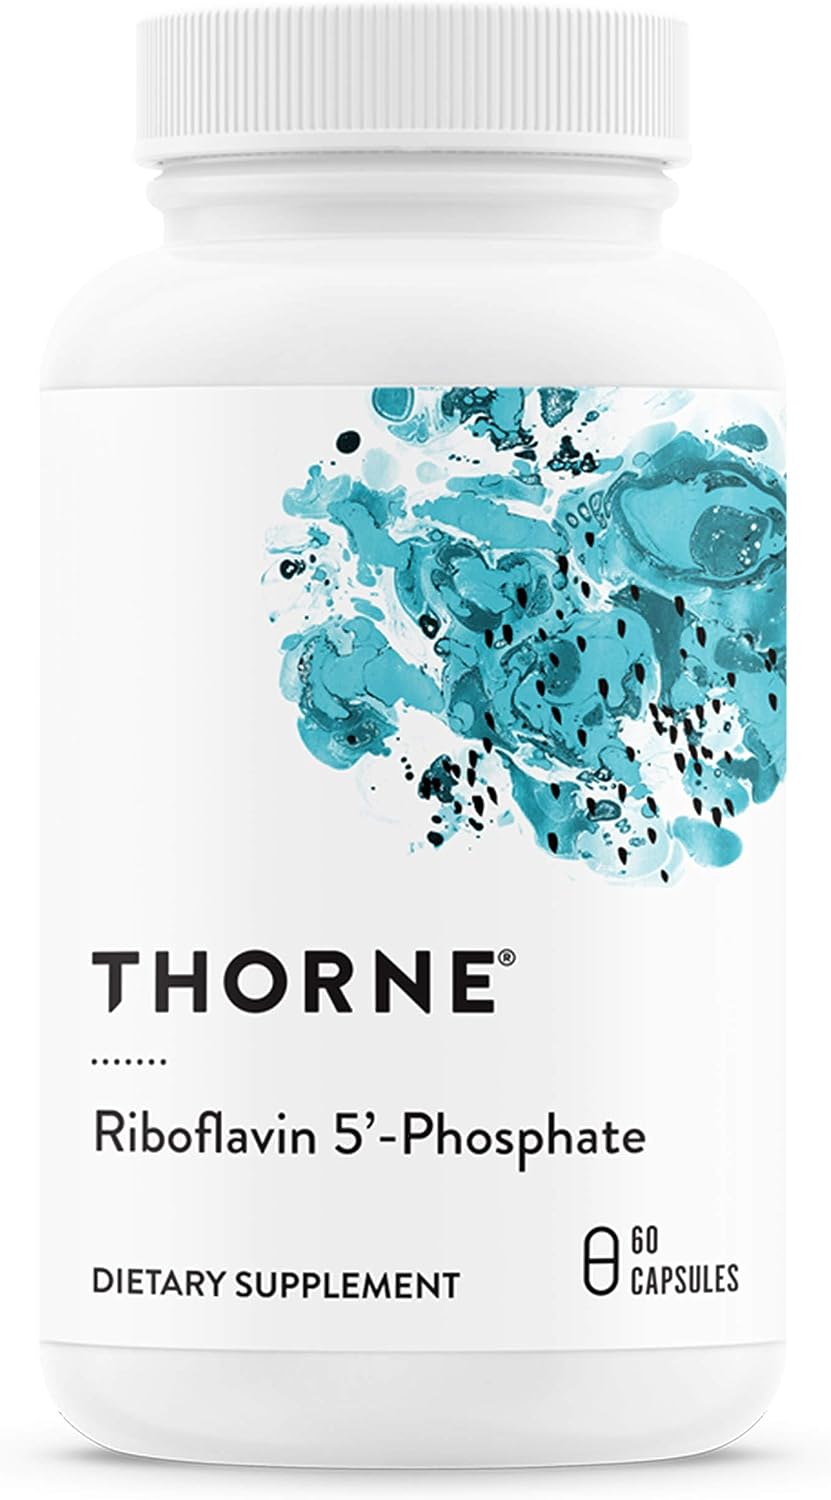 Thorne Riboavin 5'-Phosphate - Bioactive Form of Vitamin B2 for Methylation Support - 60 Capsules